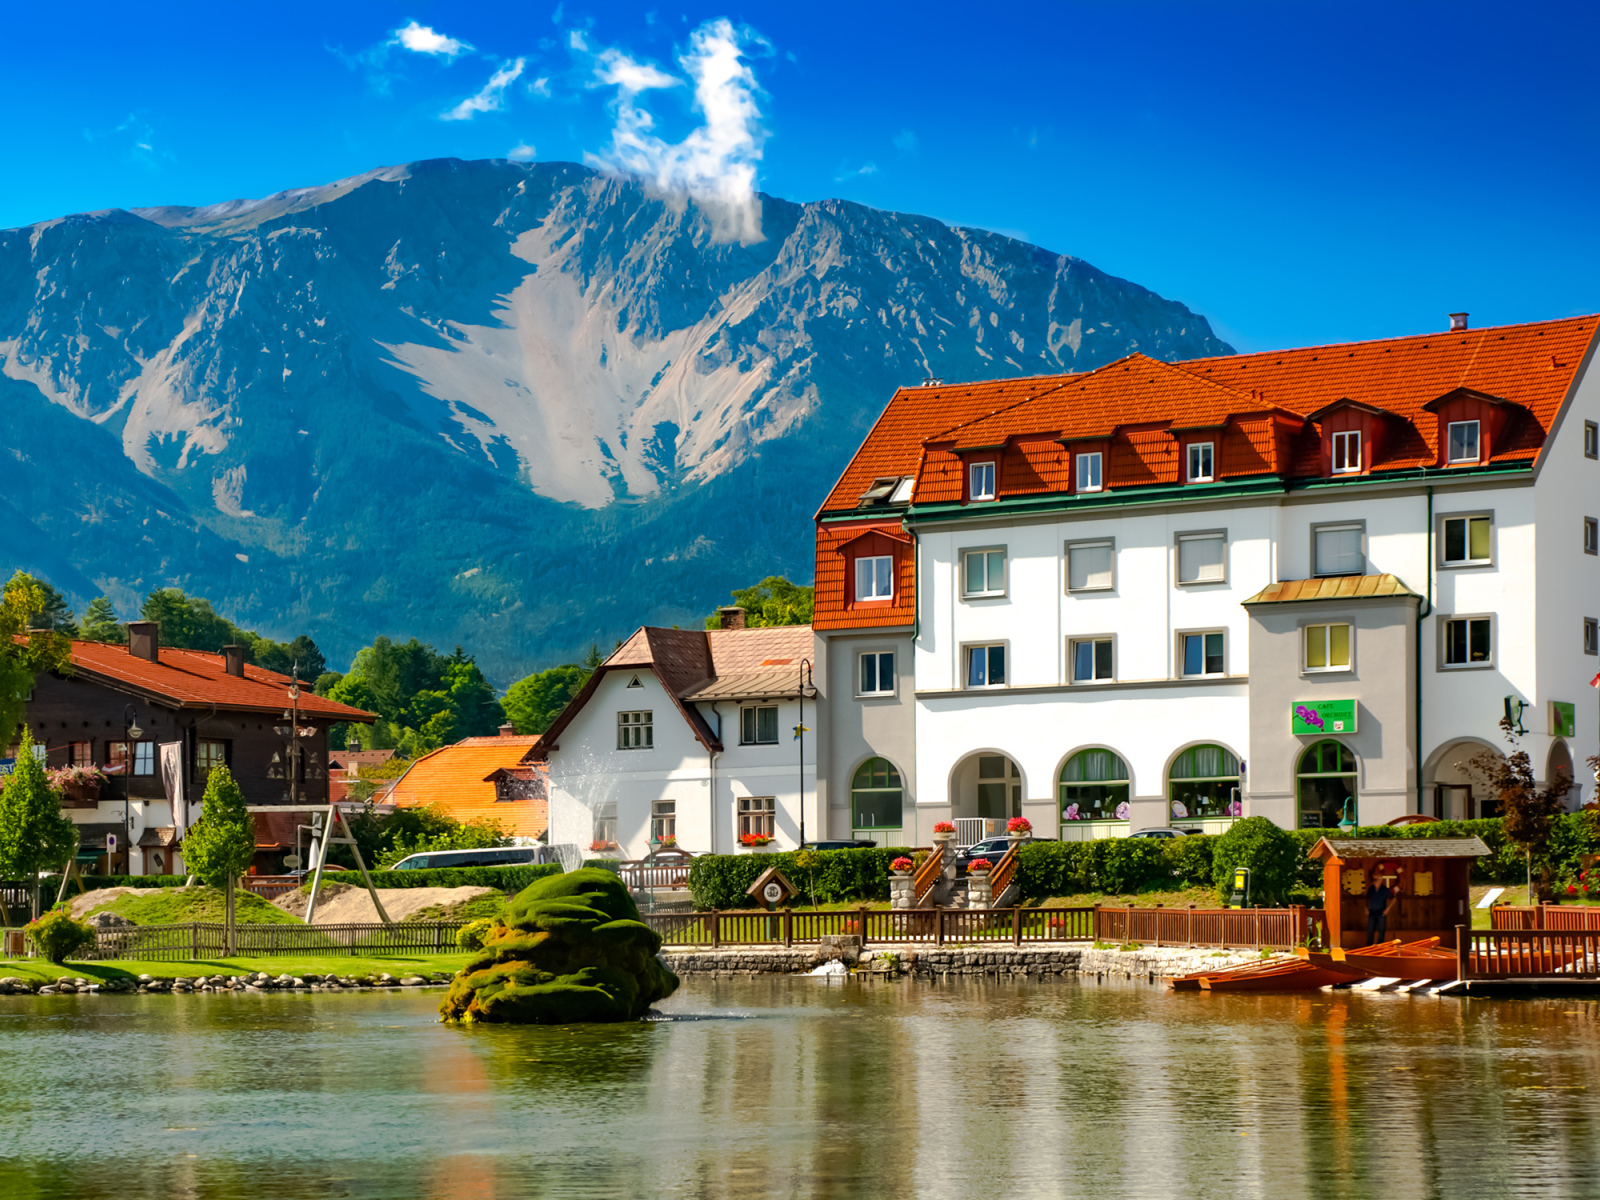 Big beautiful white house at the foot of the mountain, Austria